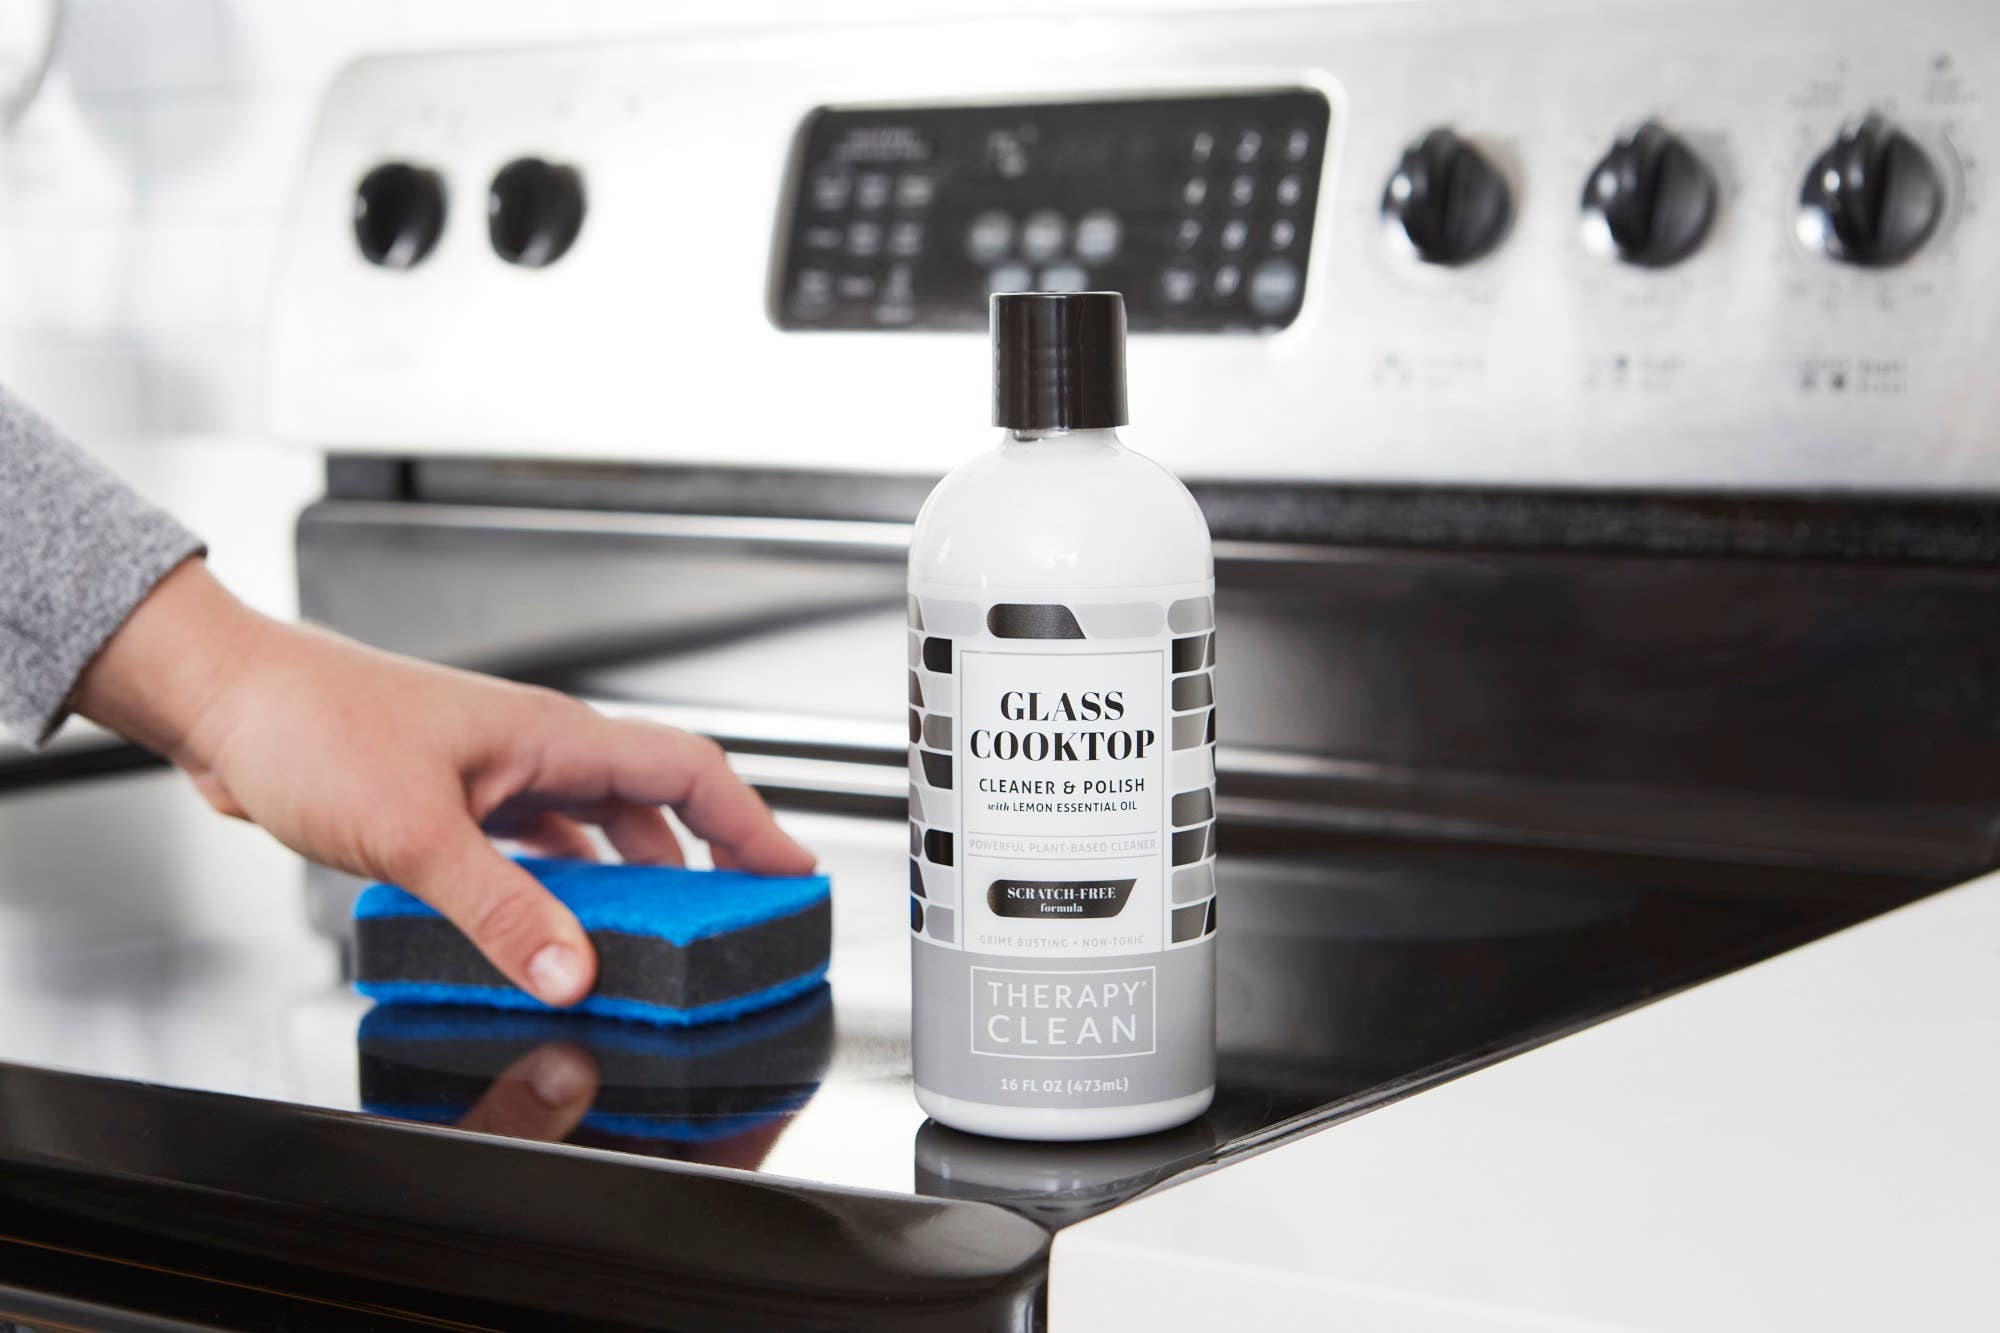 Therapy Glass Cooktop Cleaner & Polish-4